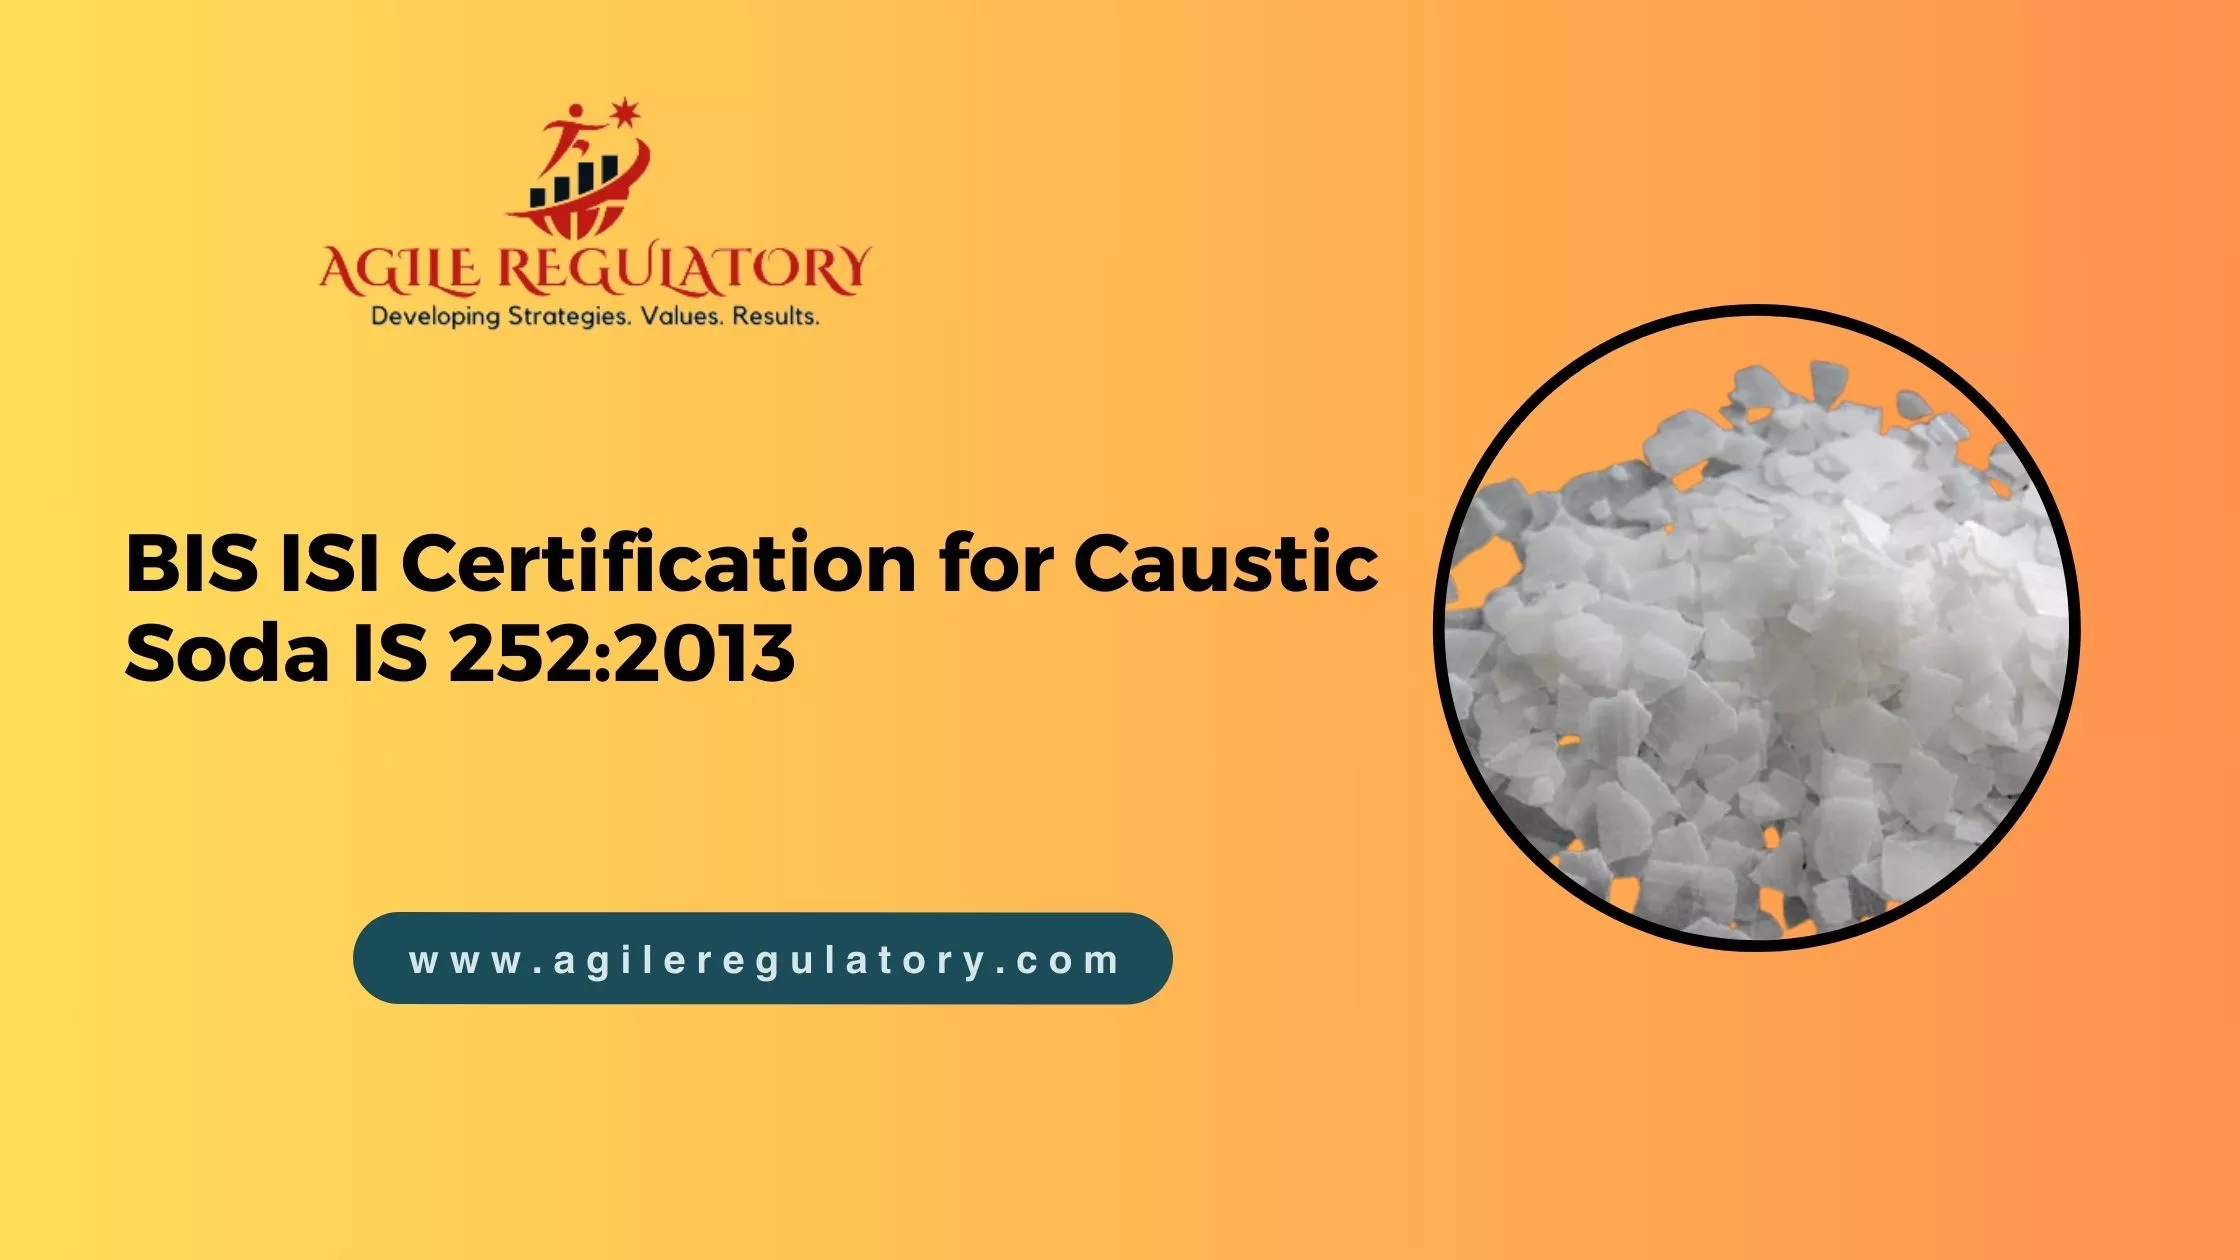 BIS ISI Certification for Caustic Soda IS 252:2013